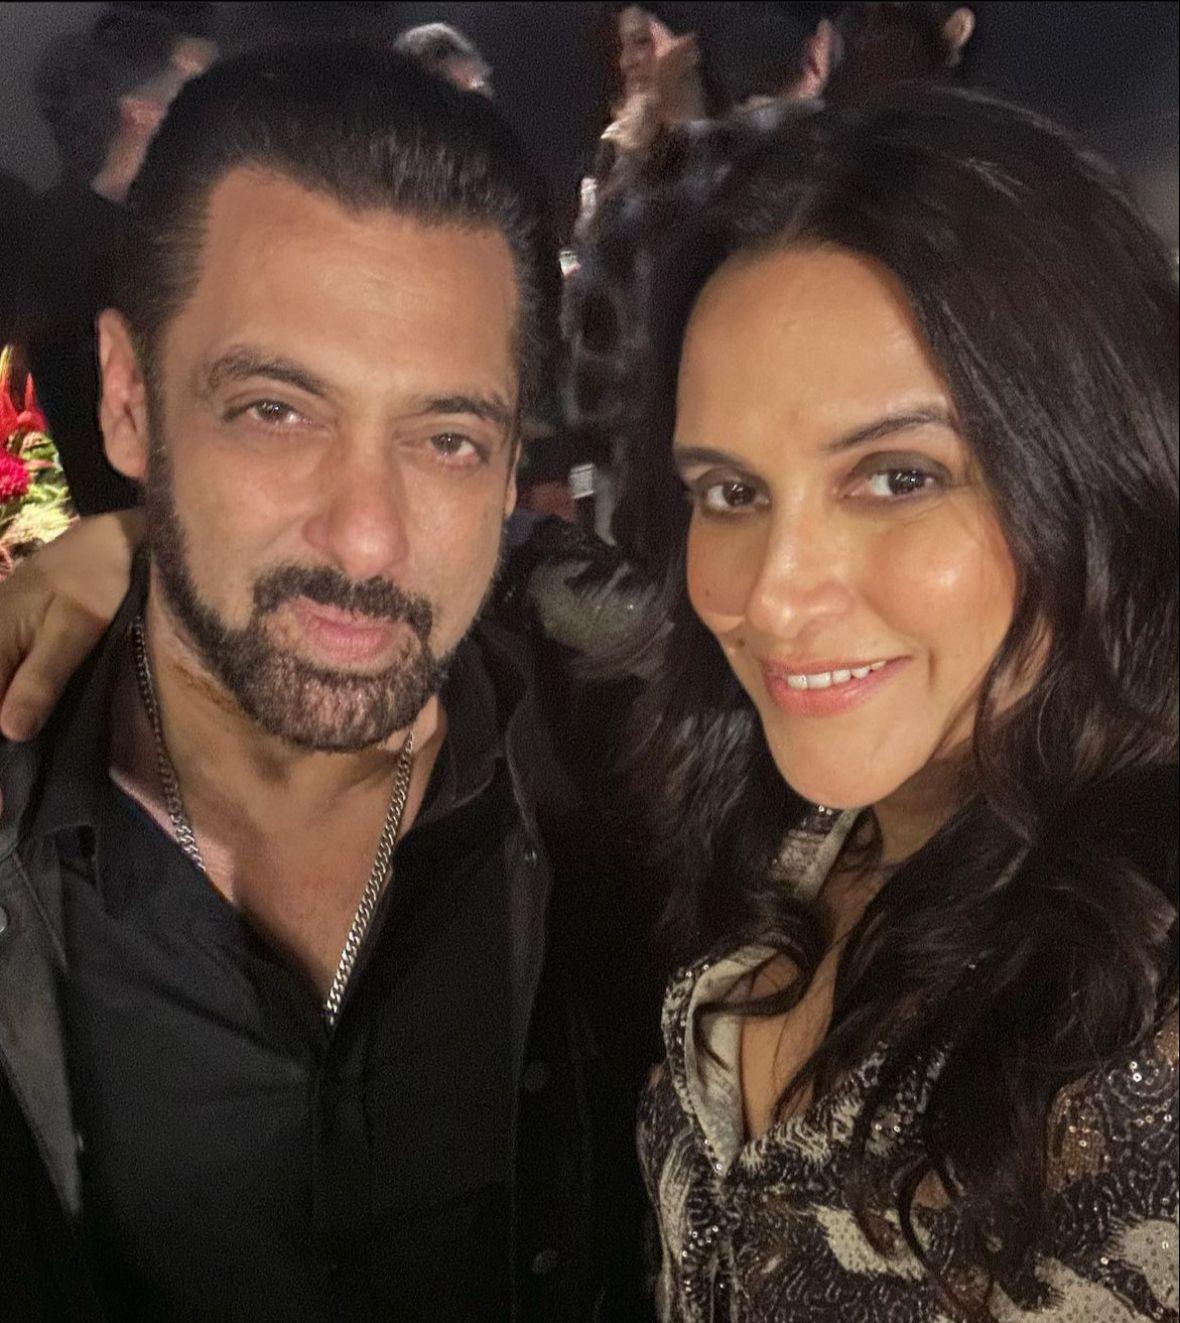 Salman Khan posed for a selfie with the beautiful Neha Dhupia at his birthday bash!